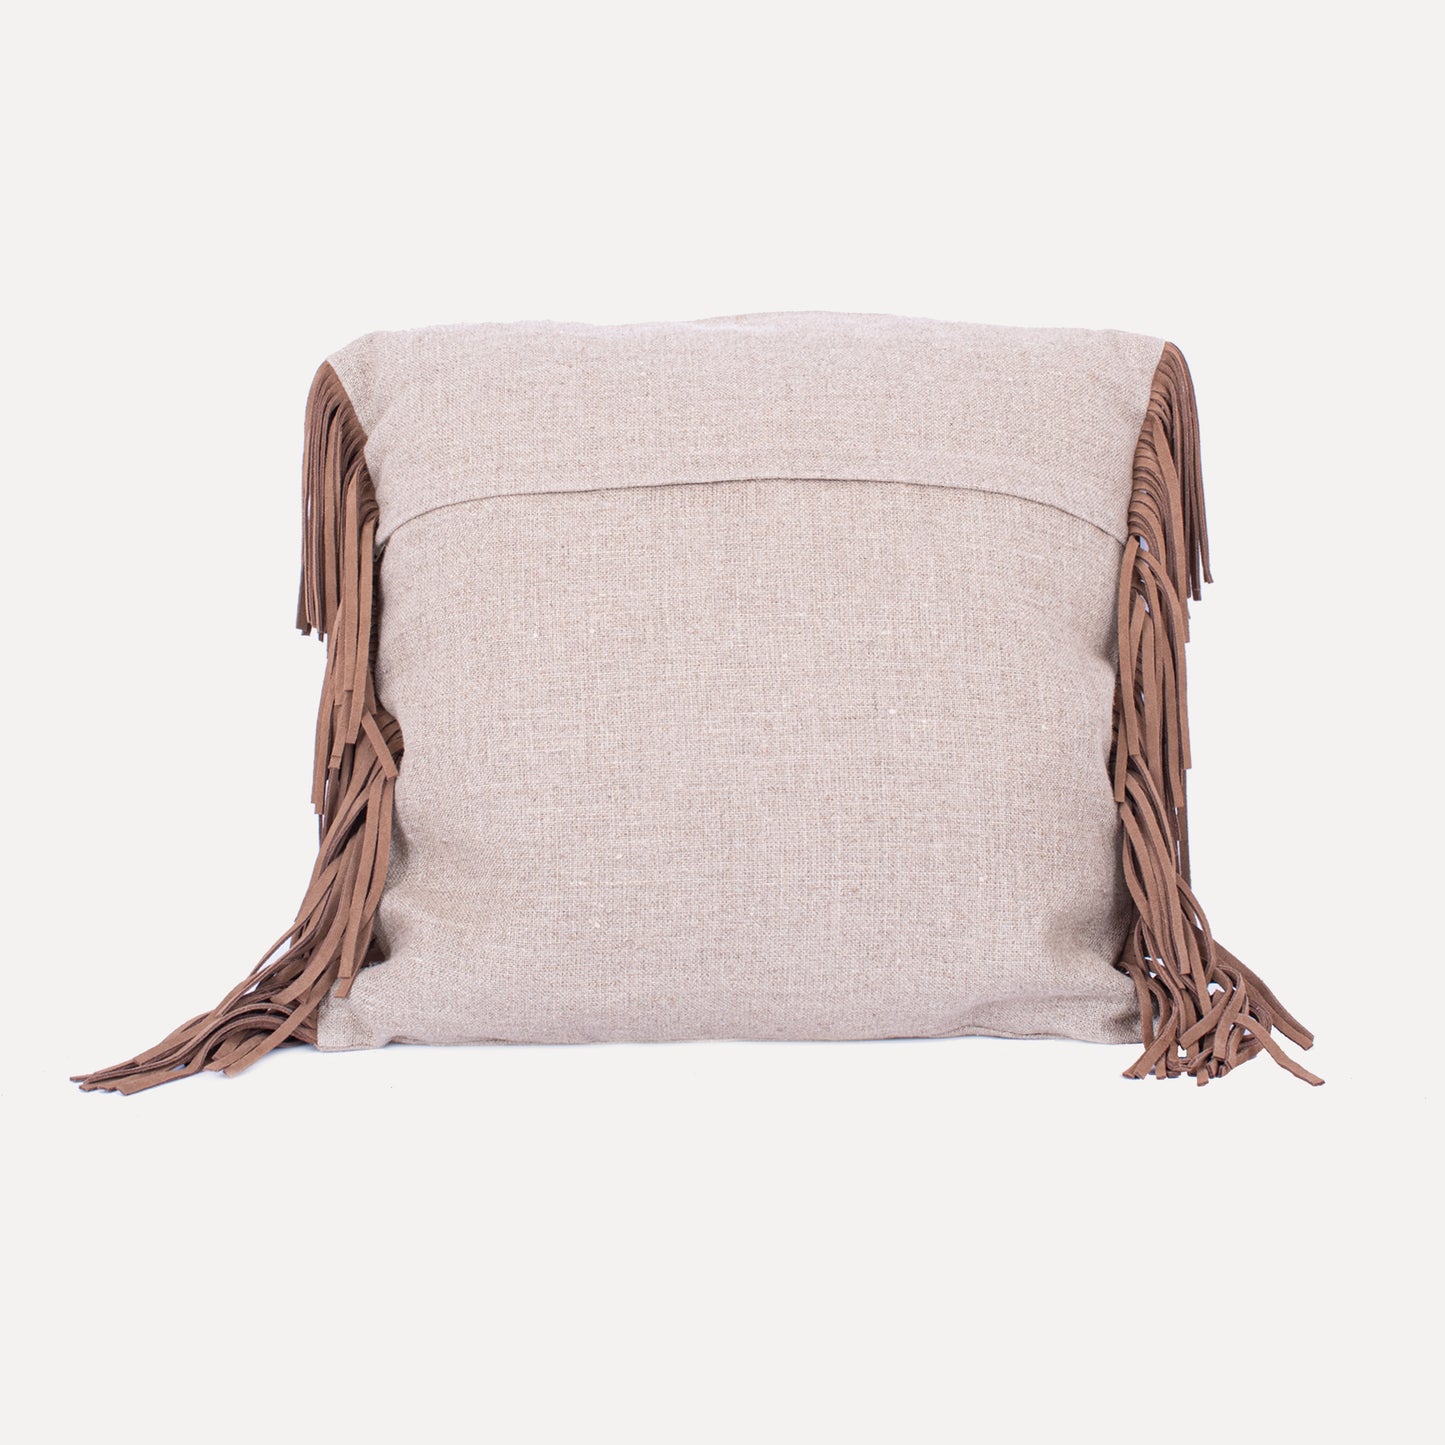 Podence - cushion with leather fringes in chocolate brown